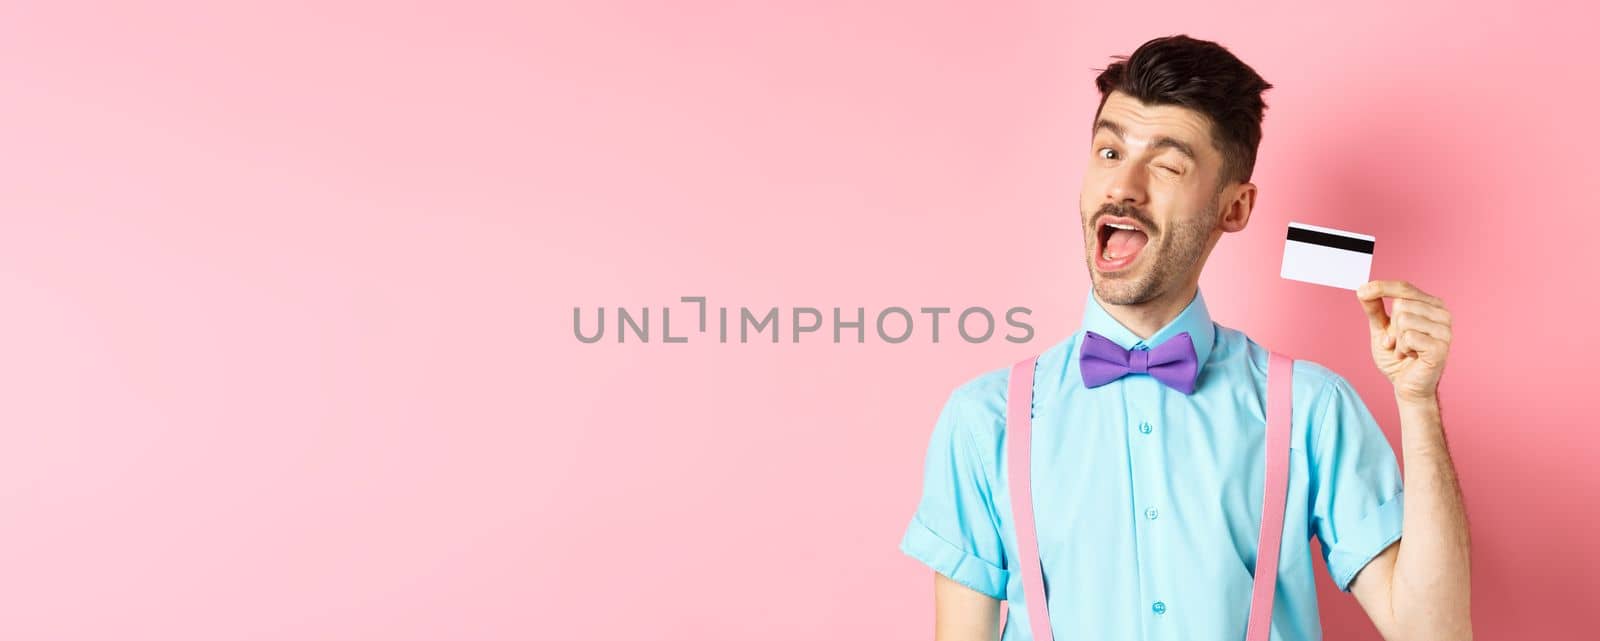 Shopping concept. Funny guy with moustache winking at camera, showing plastic credit card, recommending bank promo offer, standing on pink background by Benzoix